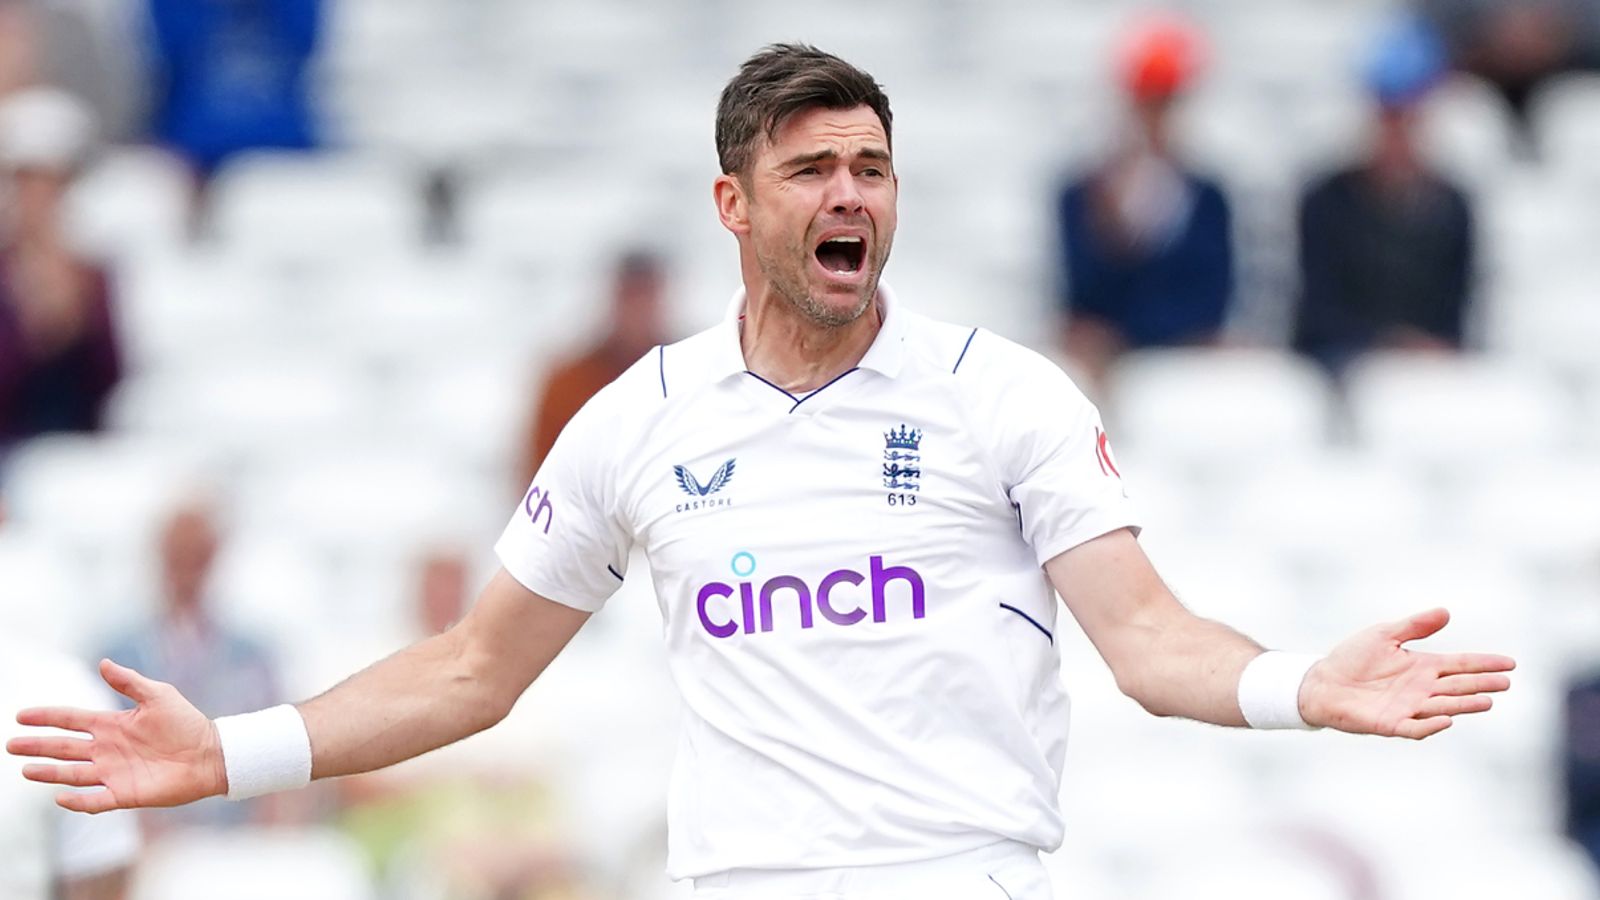 Jimmy Anderson out of third England vs New Zealand Test with injury, confirms skipper Ben Stokes